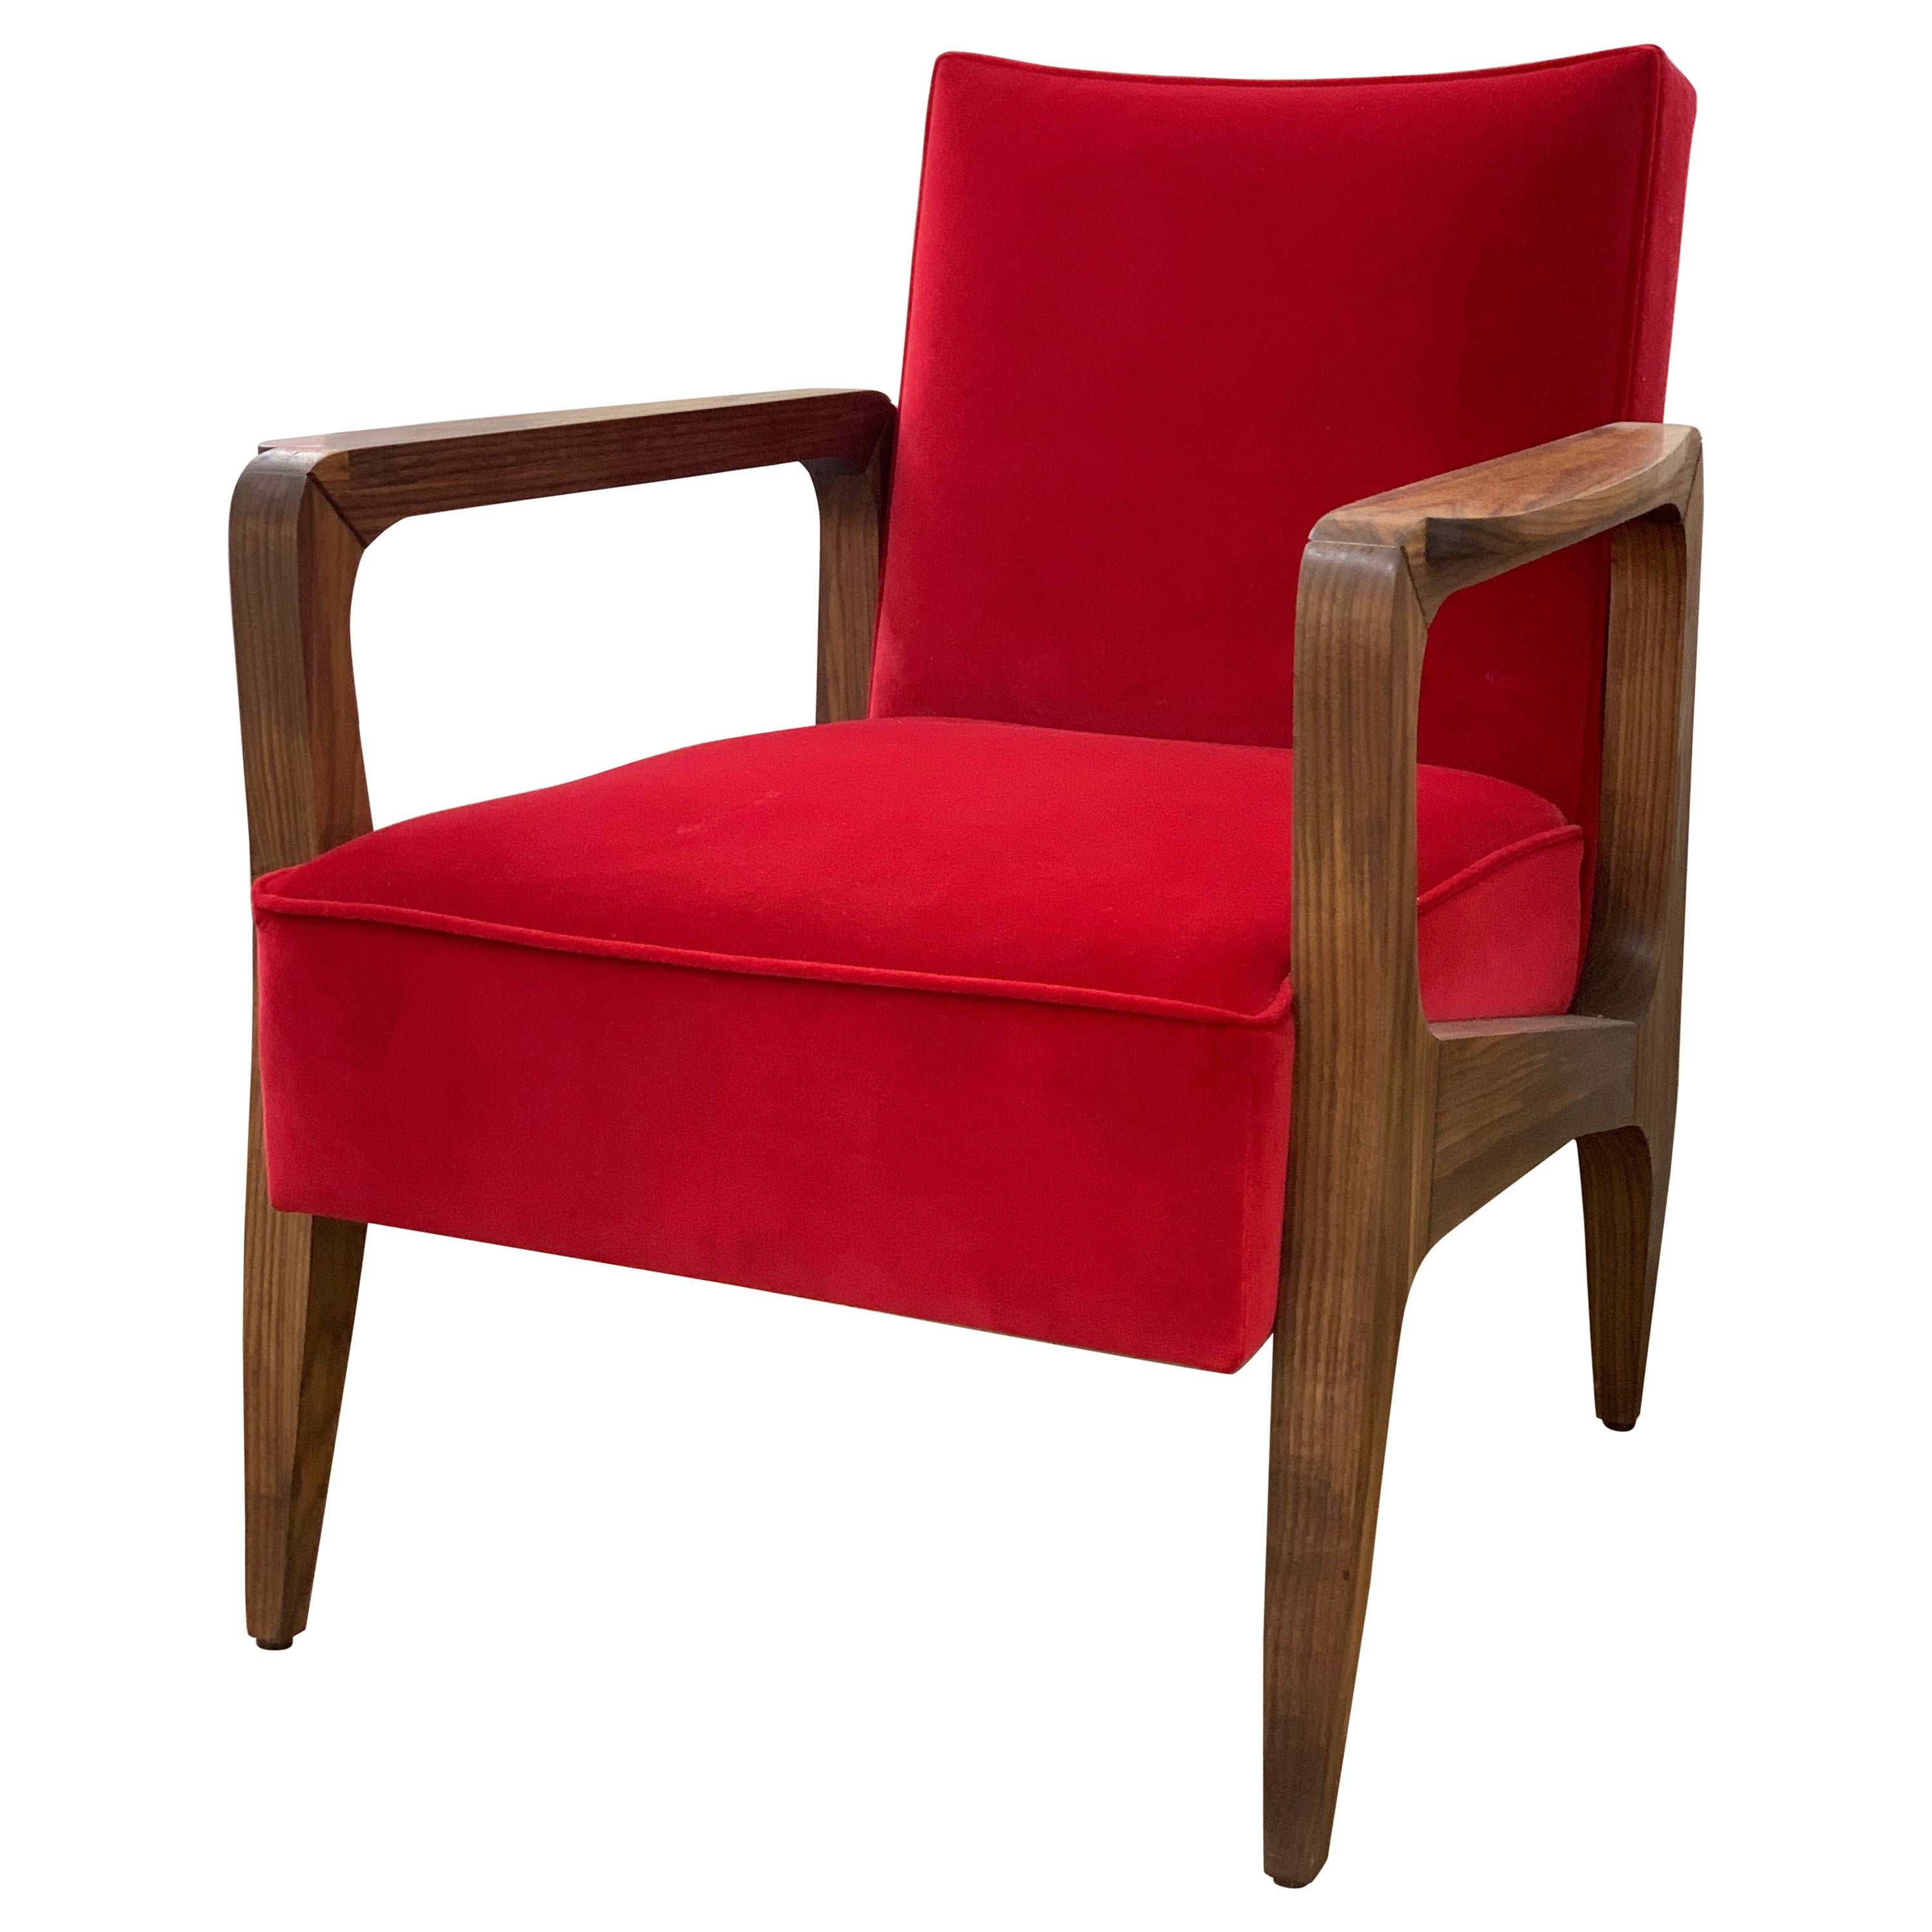 Atena Armchair in Black American Walnut and Opera Red Velvet For Sale